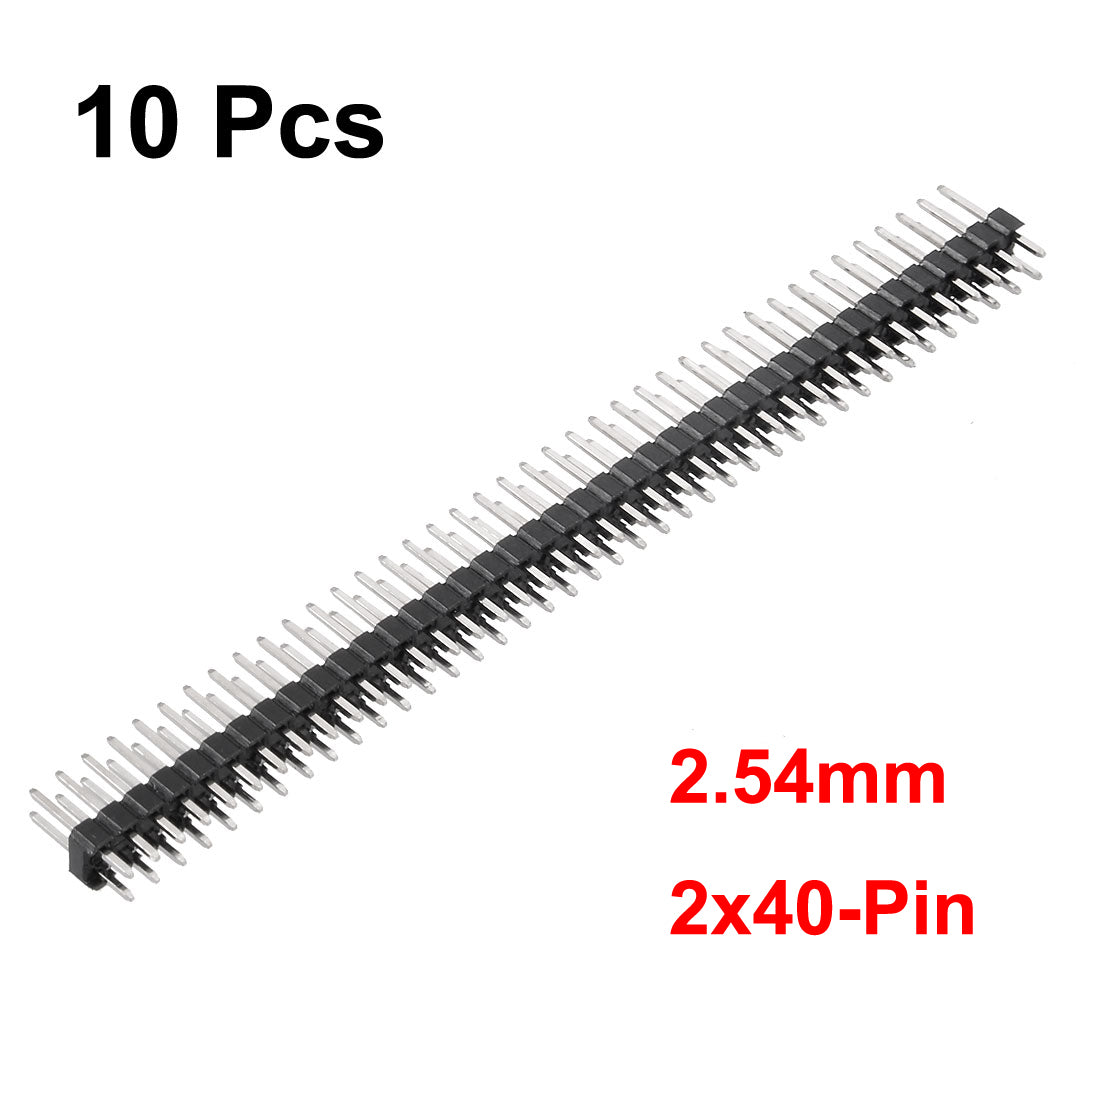 uxcell Uxcell 10Pcs 2.54mm Pitch 40-Pin 11mm Length Double Row Straight Connector Pin Header Strip for Arduino Prototype Shield